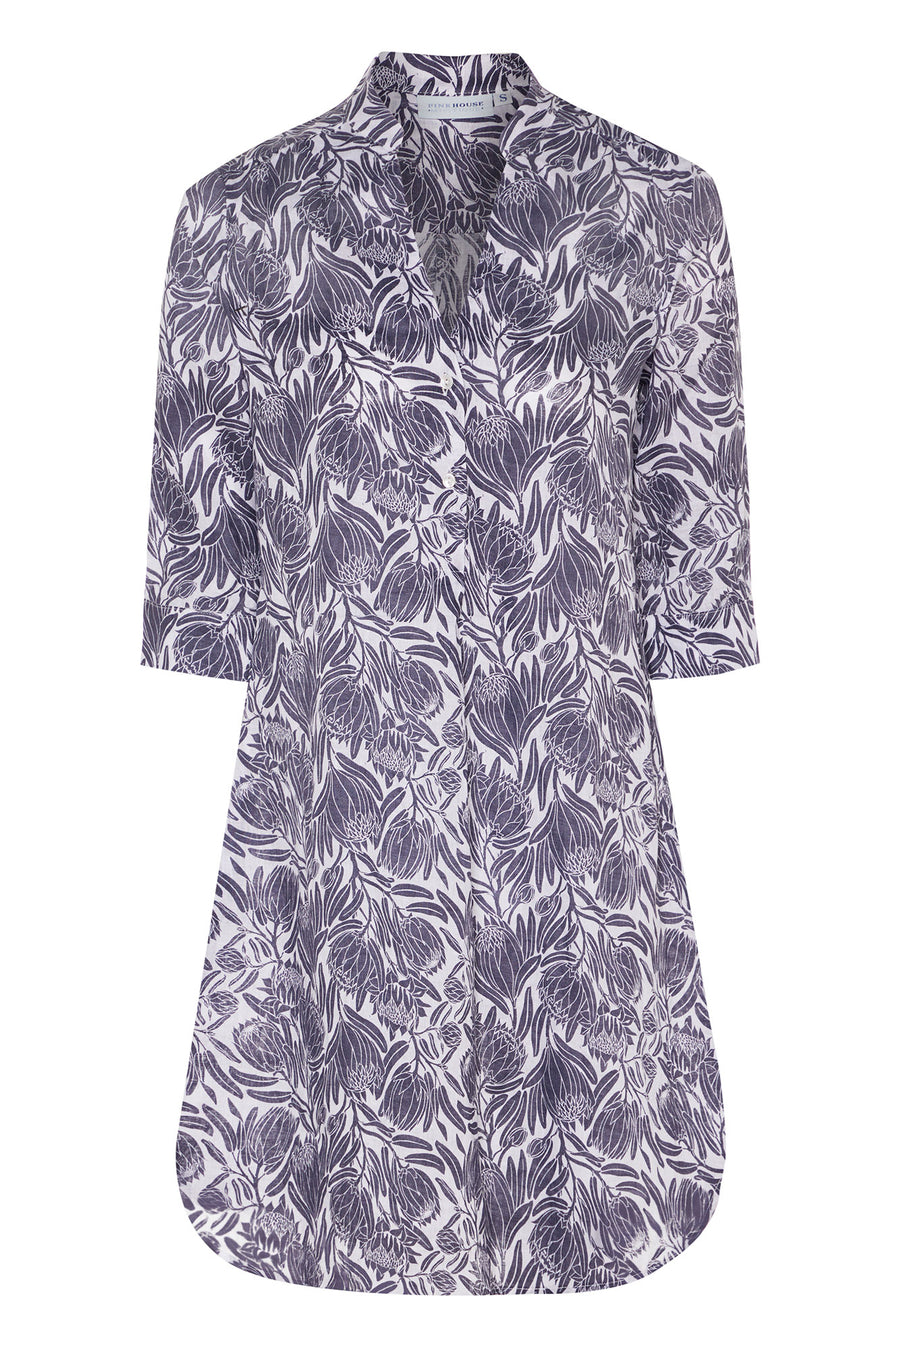 Linen villa vacation dress in aubergine navy blue floral Protea print by Lotty B for Pink House Mustique